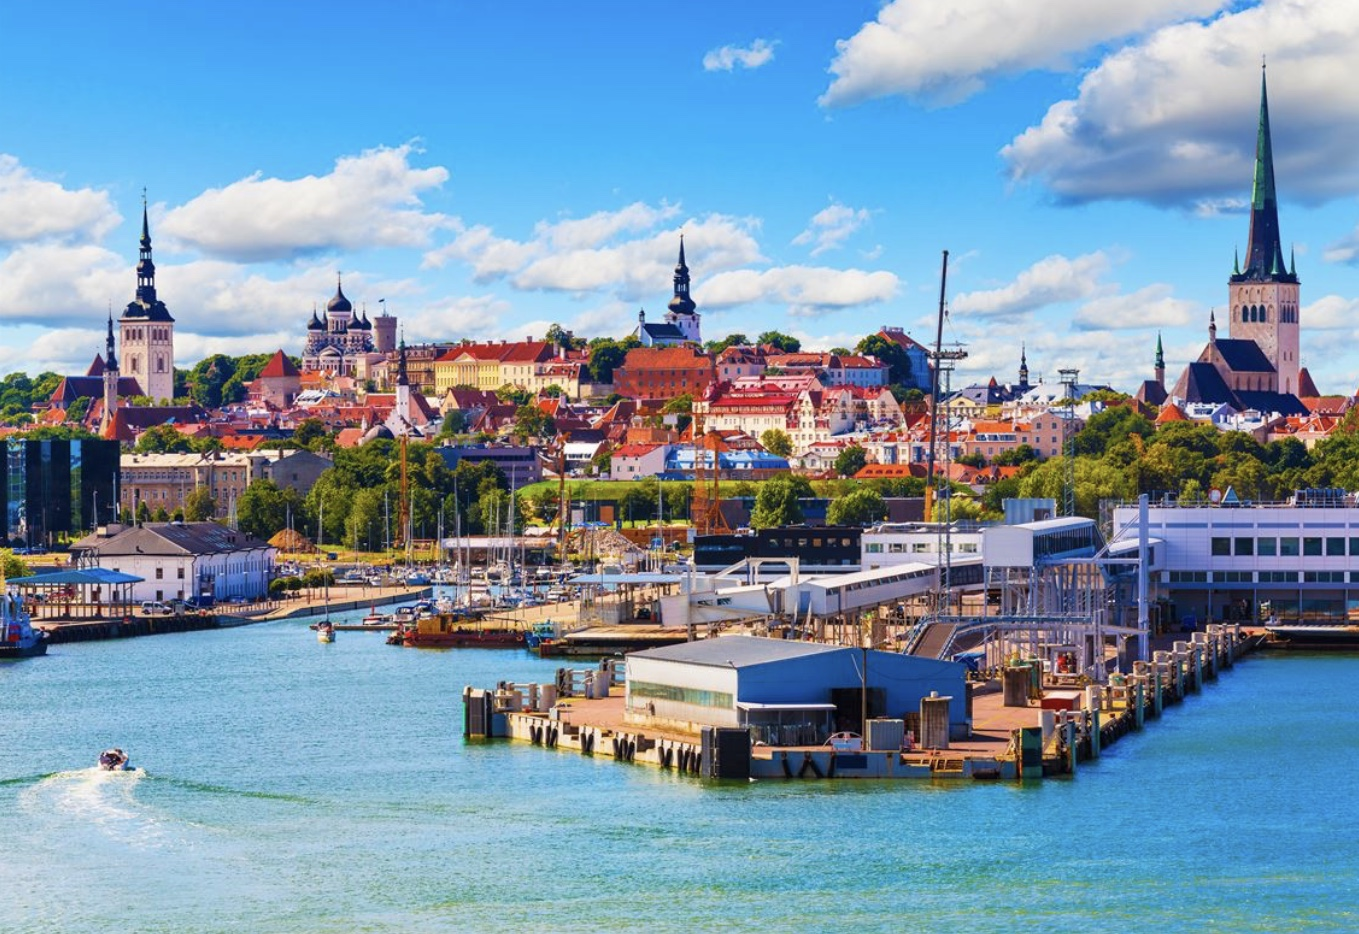 Why is Estonia considered the "Silicon Valley" of Europe? | Mercury Cash Blog